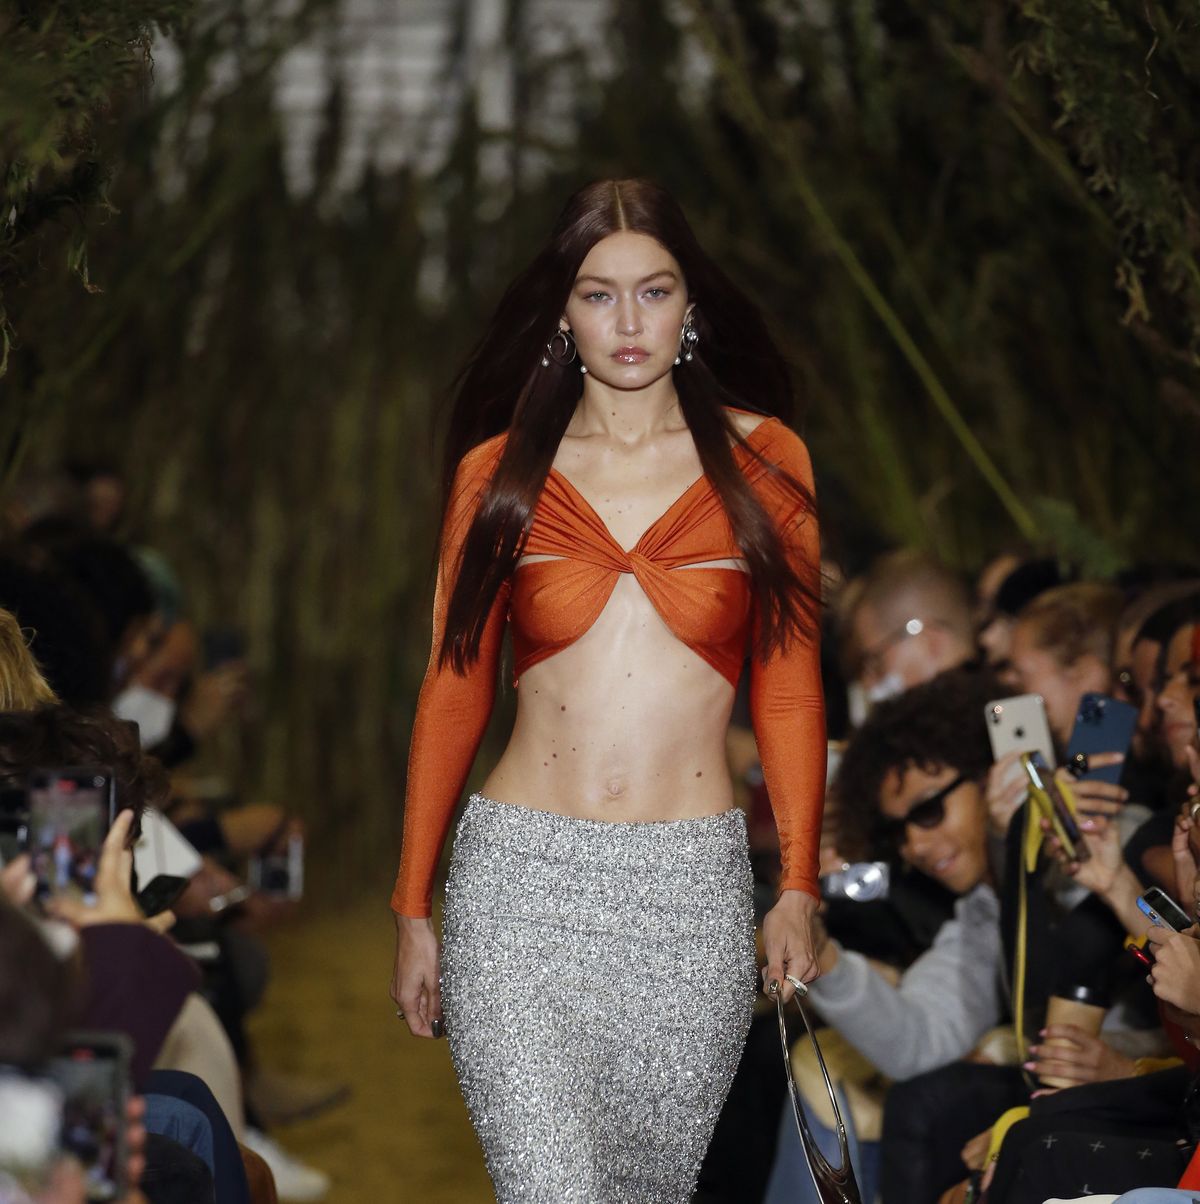 Gigi Hadid Just Walked Her First Runway Since Becoming a Mom